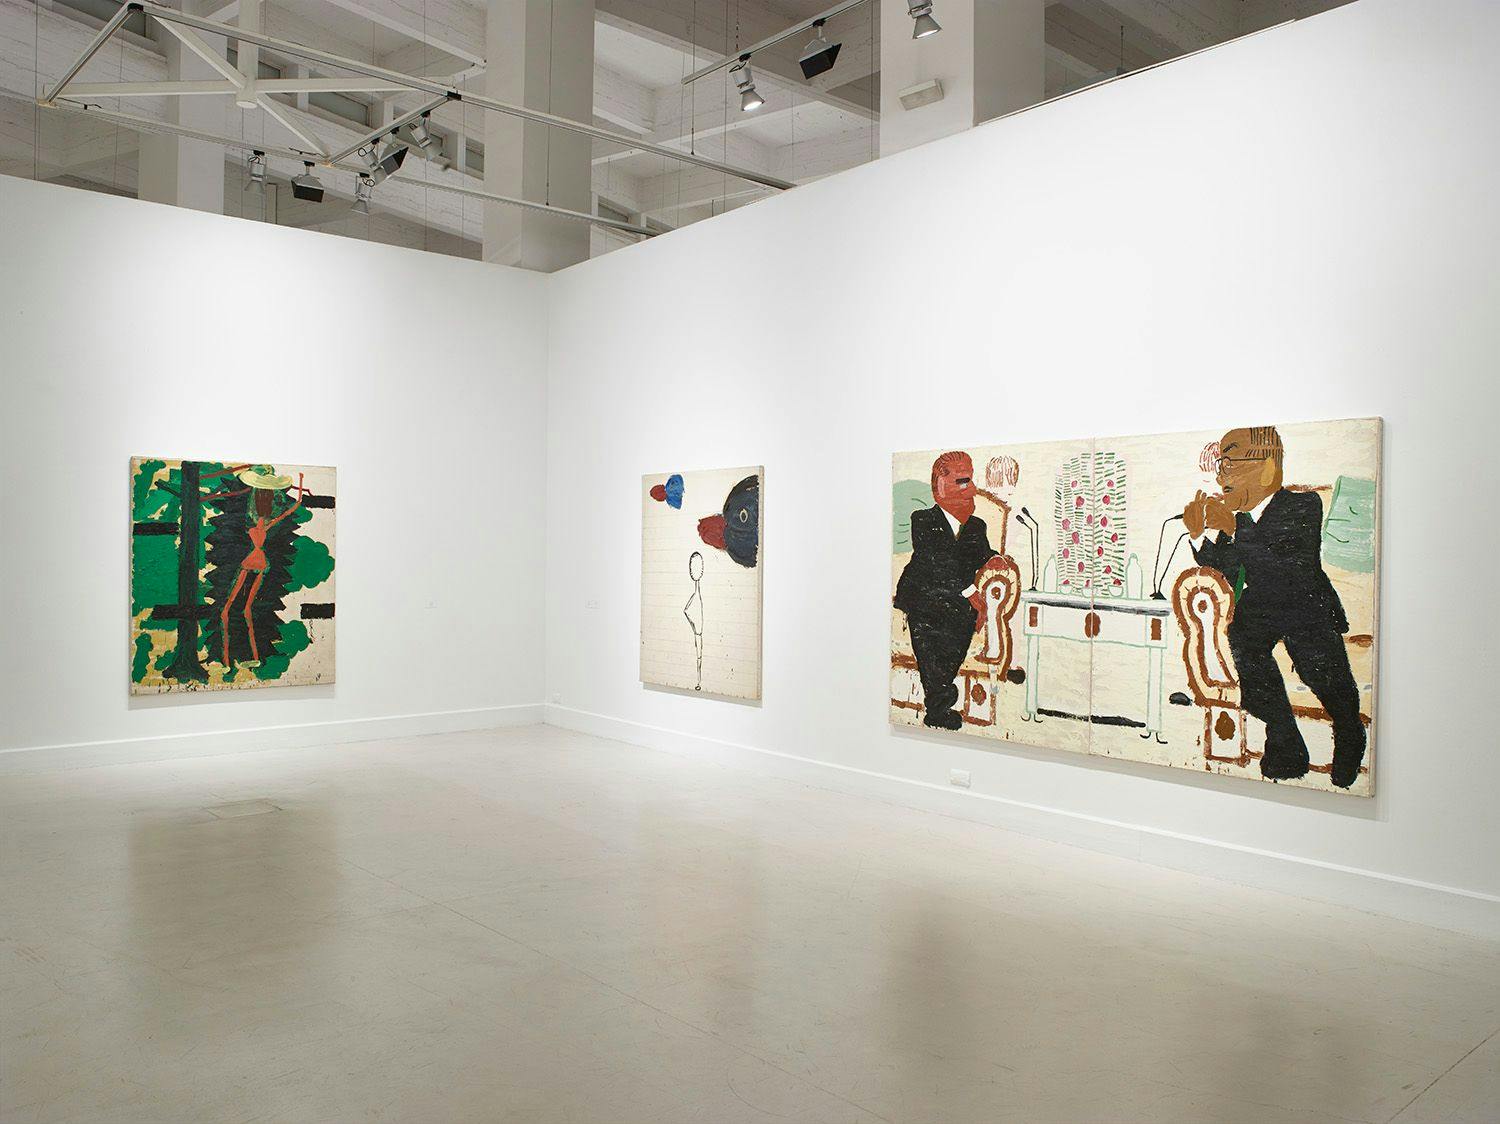 Installation view of the exhibition, Rose Wylie: Hullo Hullo..., at CAC Málaga in Málaga, dated 2018.